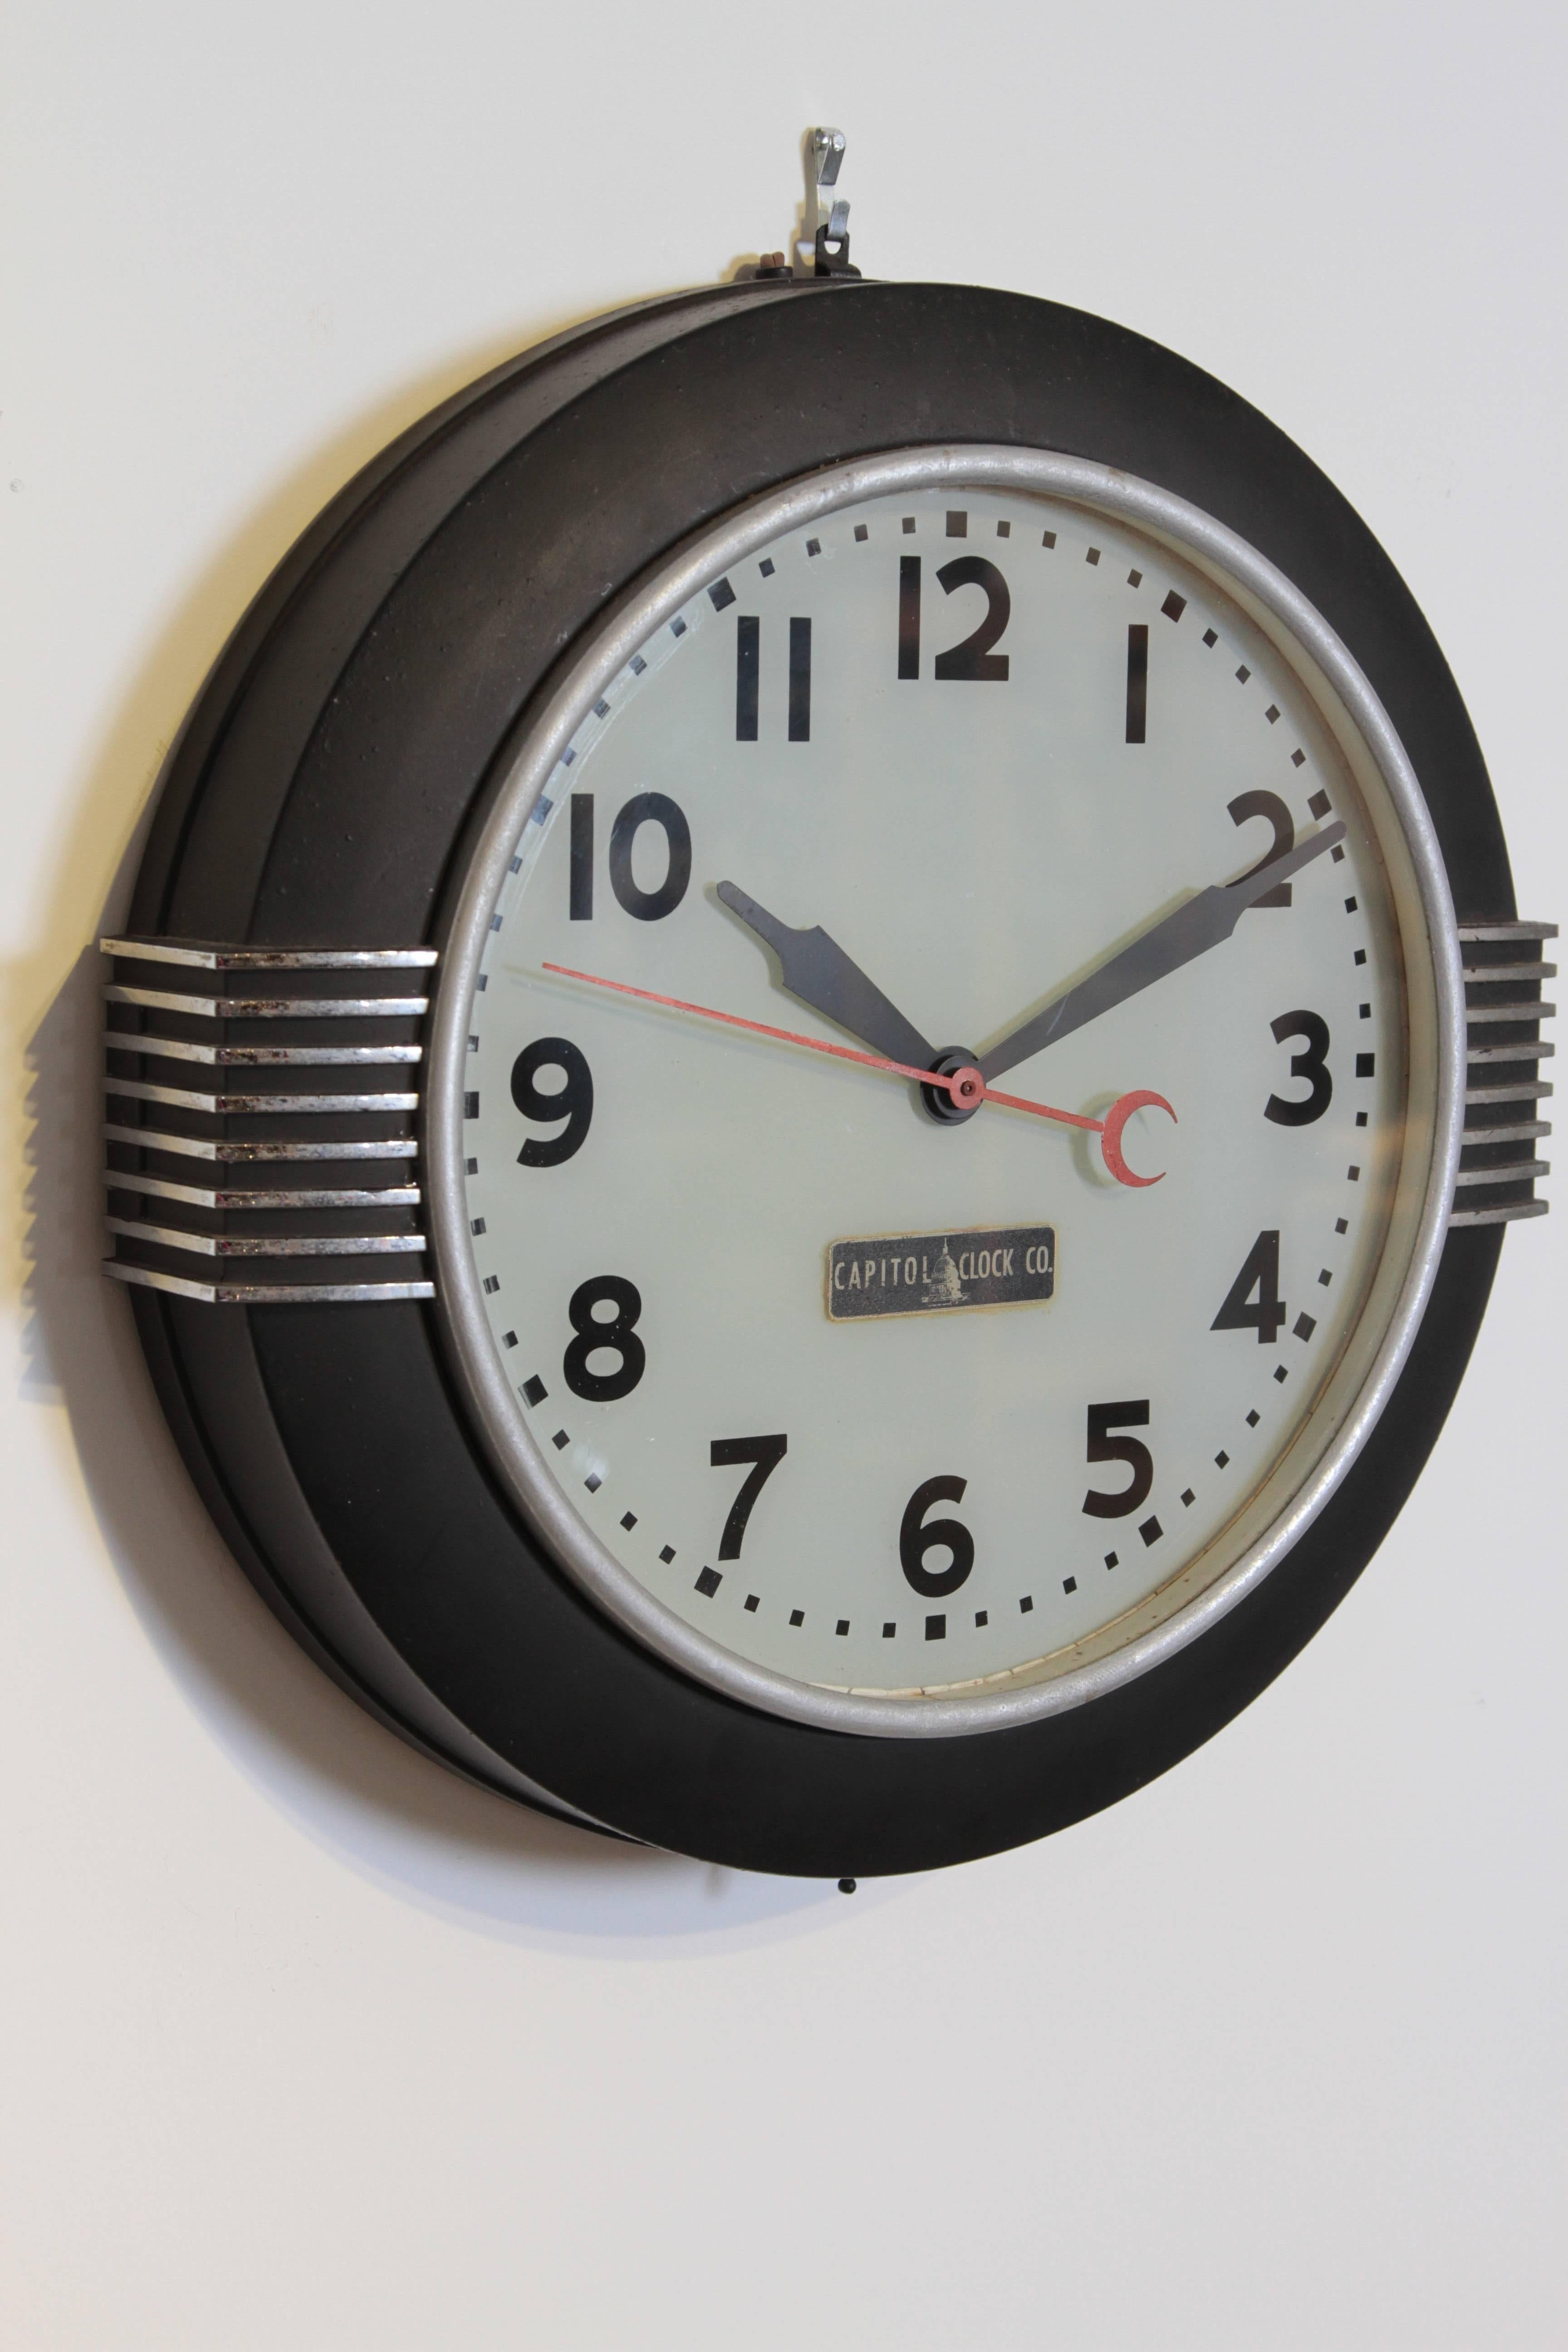 Art Deco Machine Age wall clock Hammond Synchronous

Large Hammond Synchronous wall clock model # 341, lot #1000, with clean illuminated dial.
Laurens Hammond patented motor 1932.
Capitol Clock company.

Killer finned and back-lit large wall